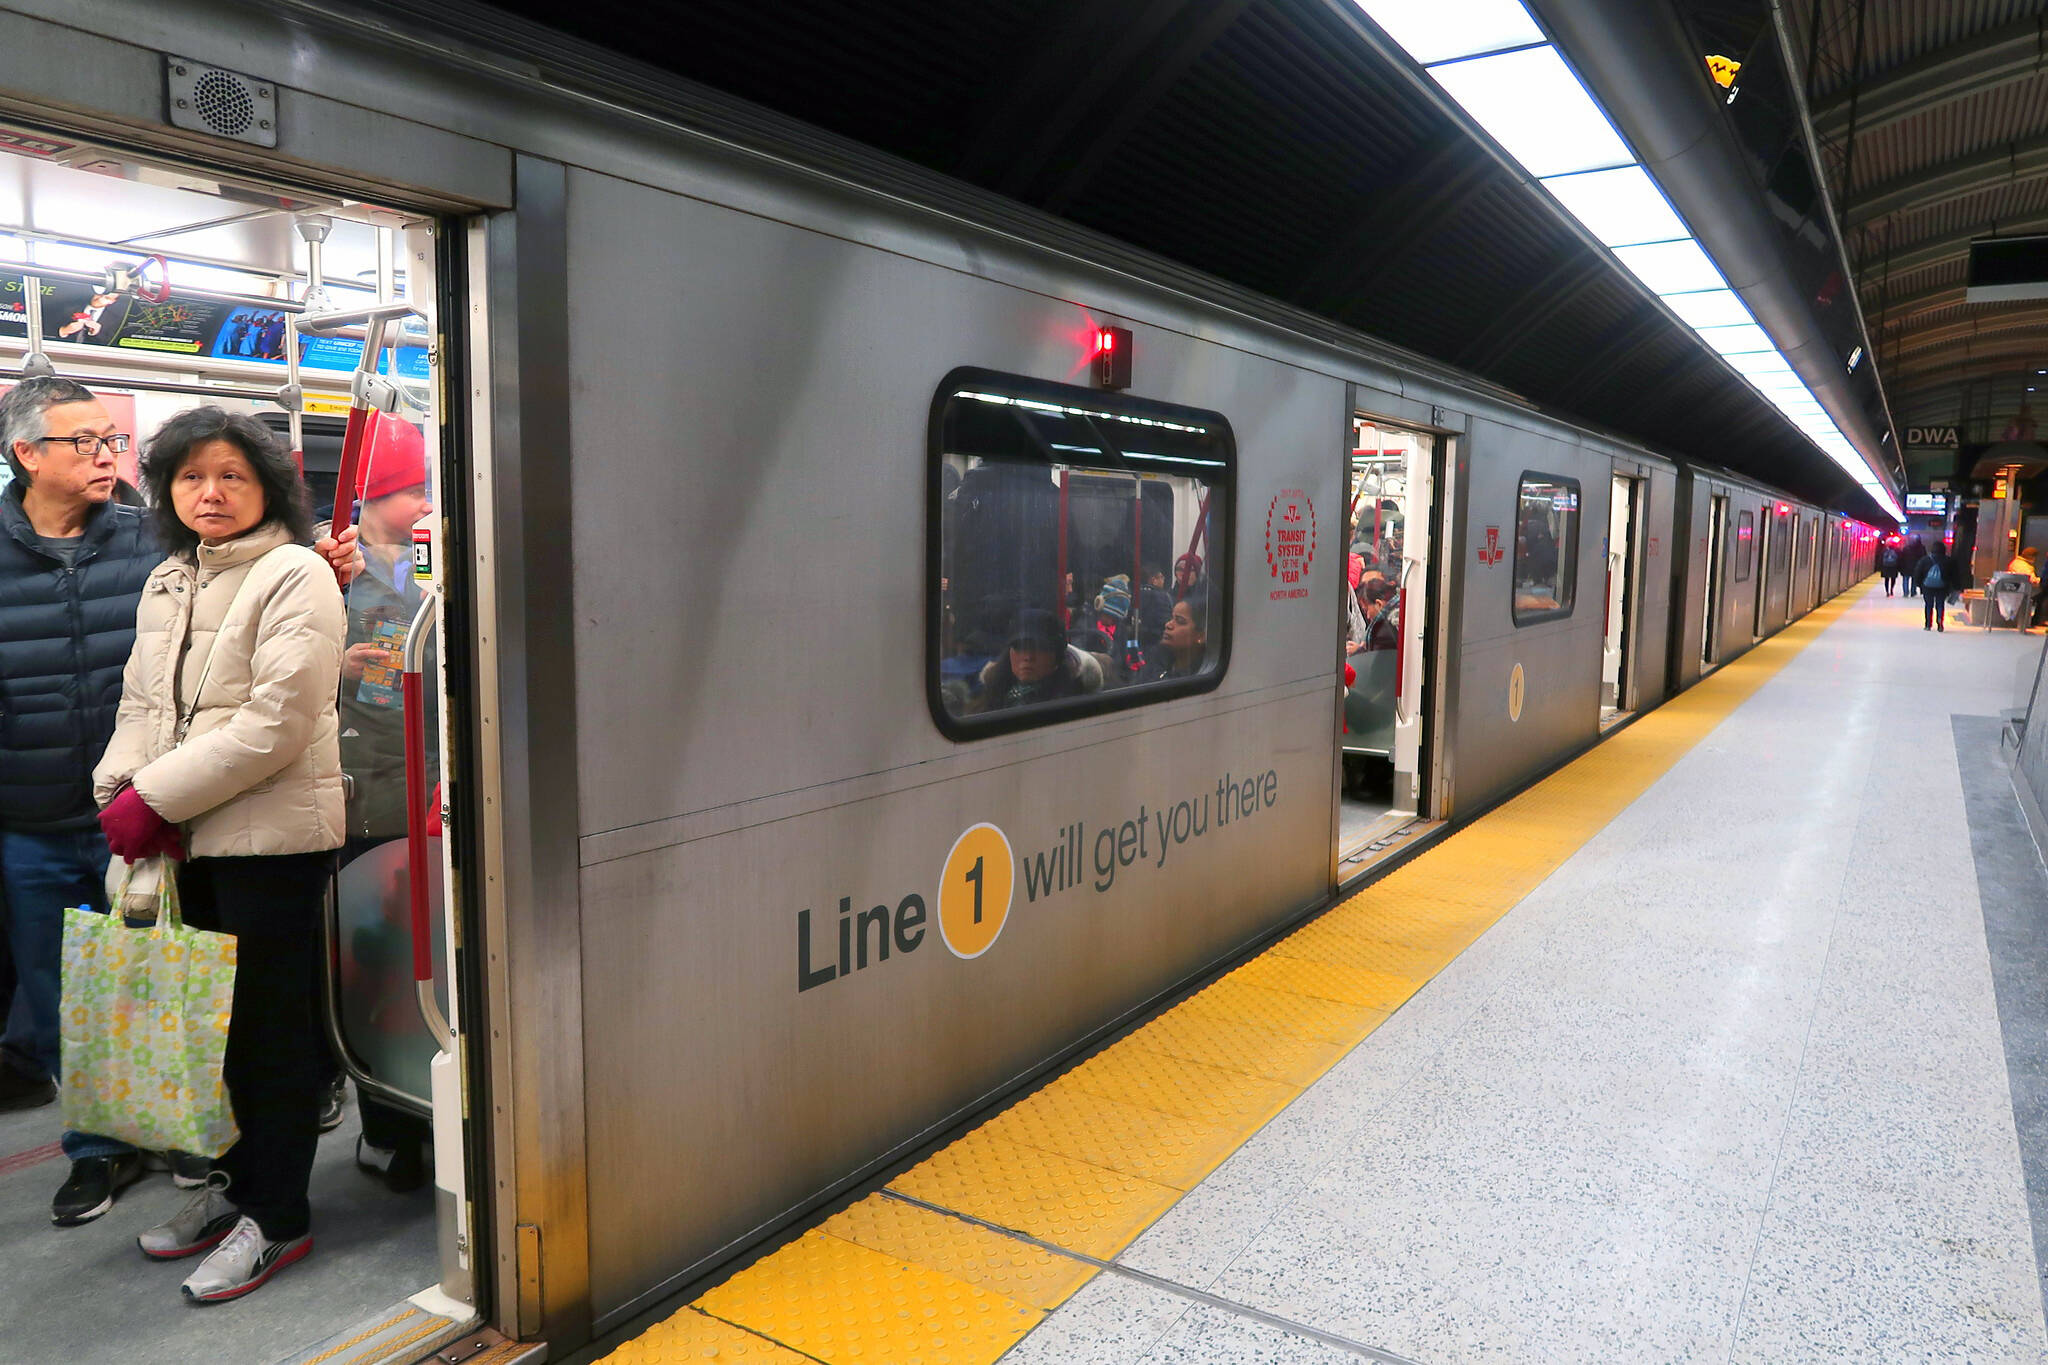 The TTC is closing parts of Toronto's busiest subway line for 10 days